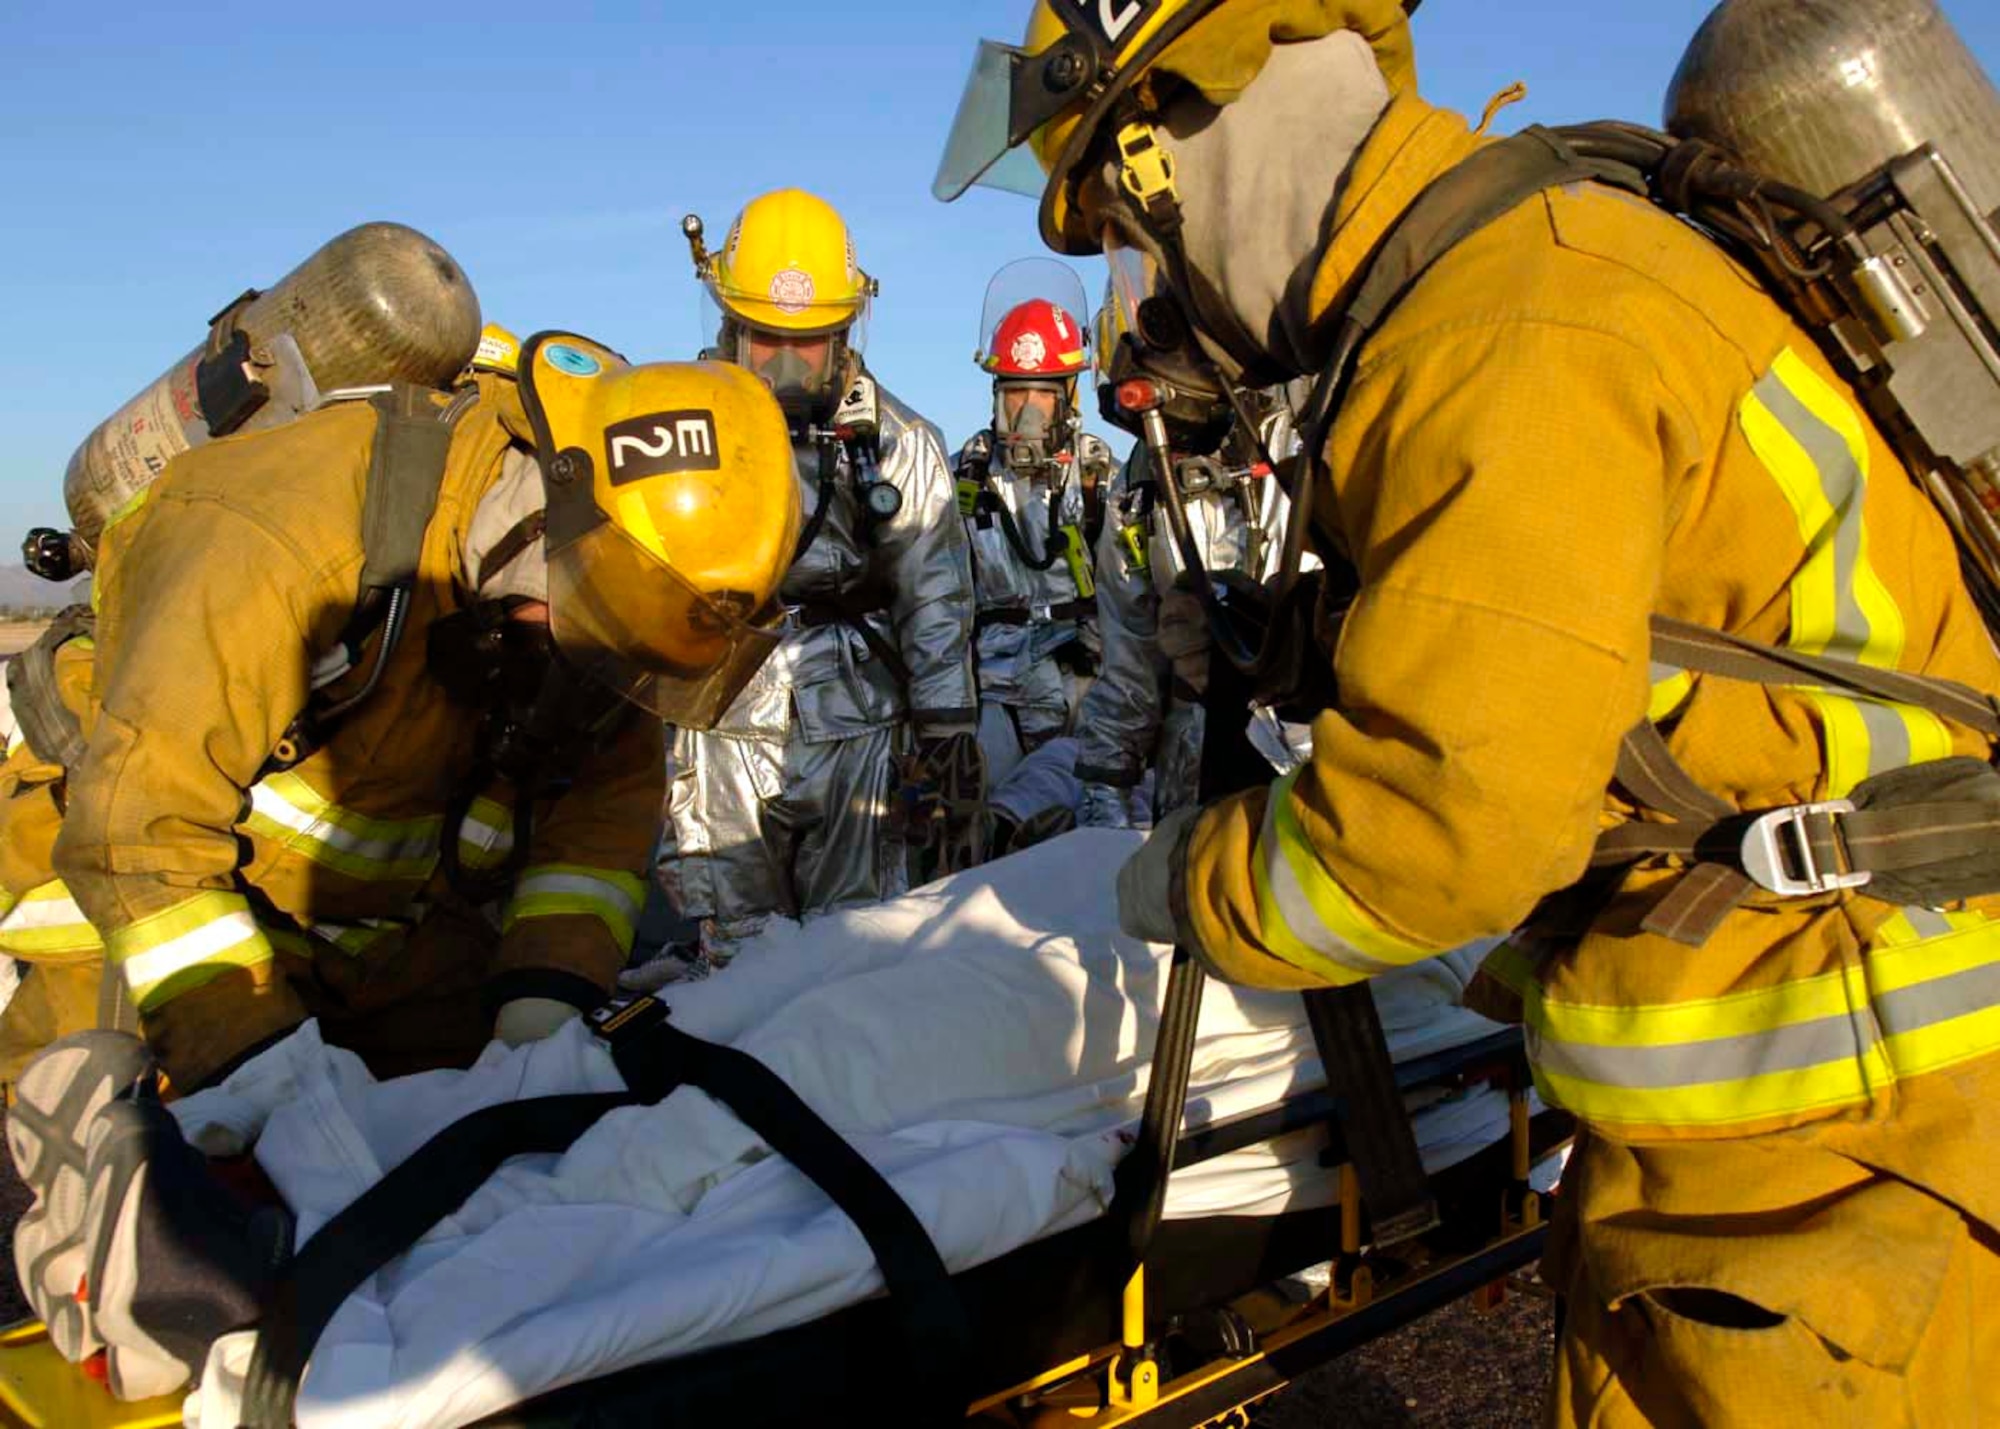 Firefighters from Davis-Monthan Air Force Base and the Tucson Fire Department provide temporary treatment to survivors of a simulated aircraft accident prior to being transported to a local hospital Dec. 4 at Davis-Monthan AFB, Ariz. Exercise Vigilant Shield 07 is a joint Department of Defense and federal nuclear weapon accident exercise. The exercise scenario involved a C-17 Globemaster III carrying four nuclear weapons to be diverted to Davis-Monthan AFB due to simulated engine failure that caused an aircraft accident. Davis-Monthan firefighters, the Tucson Fire Department, Tucson Police Department, and many different agencies ranging form local to national levels responded to the simulated scene. (U.S. Air Force photo/Senior Airman Christina D. Ponte) 